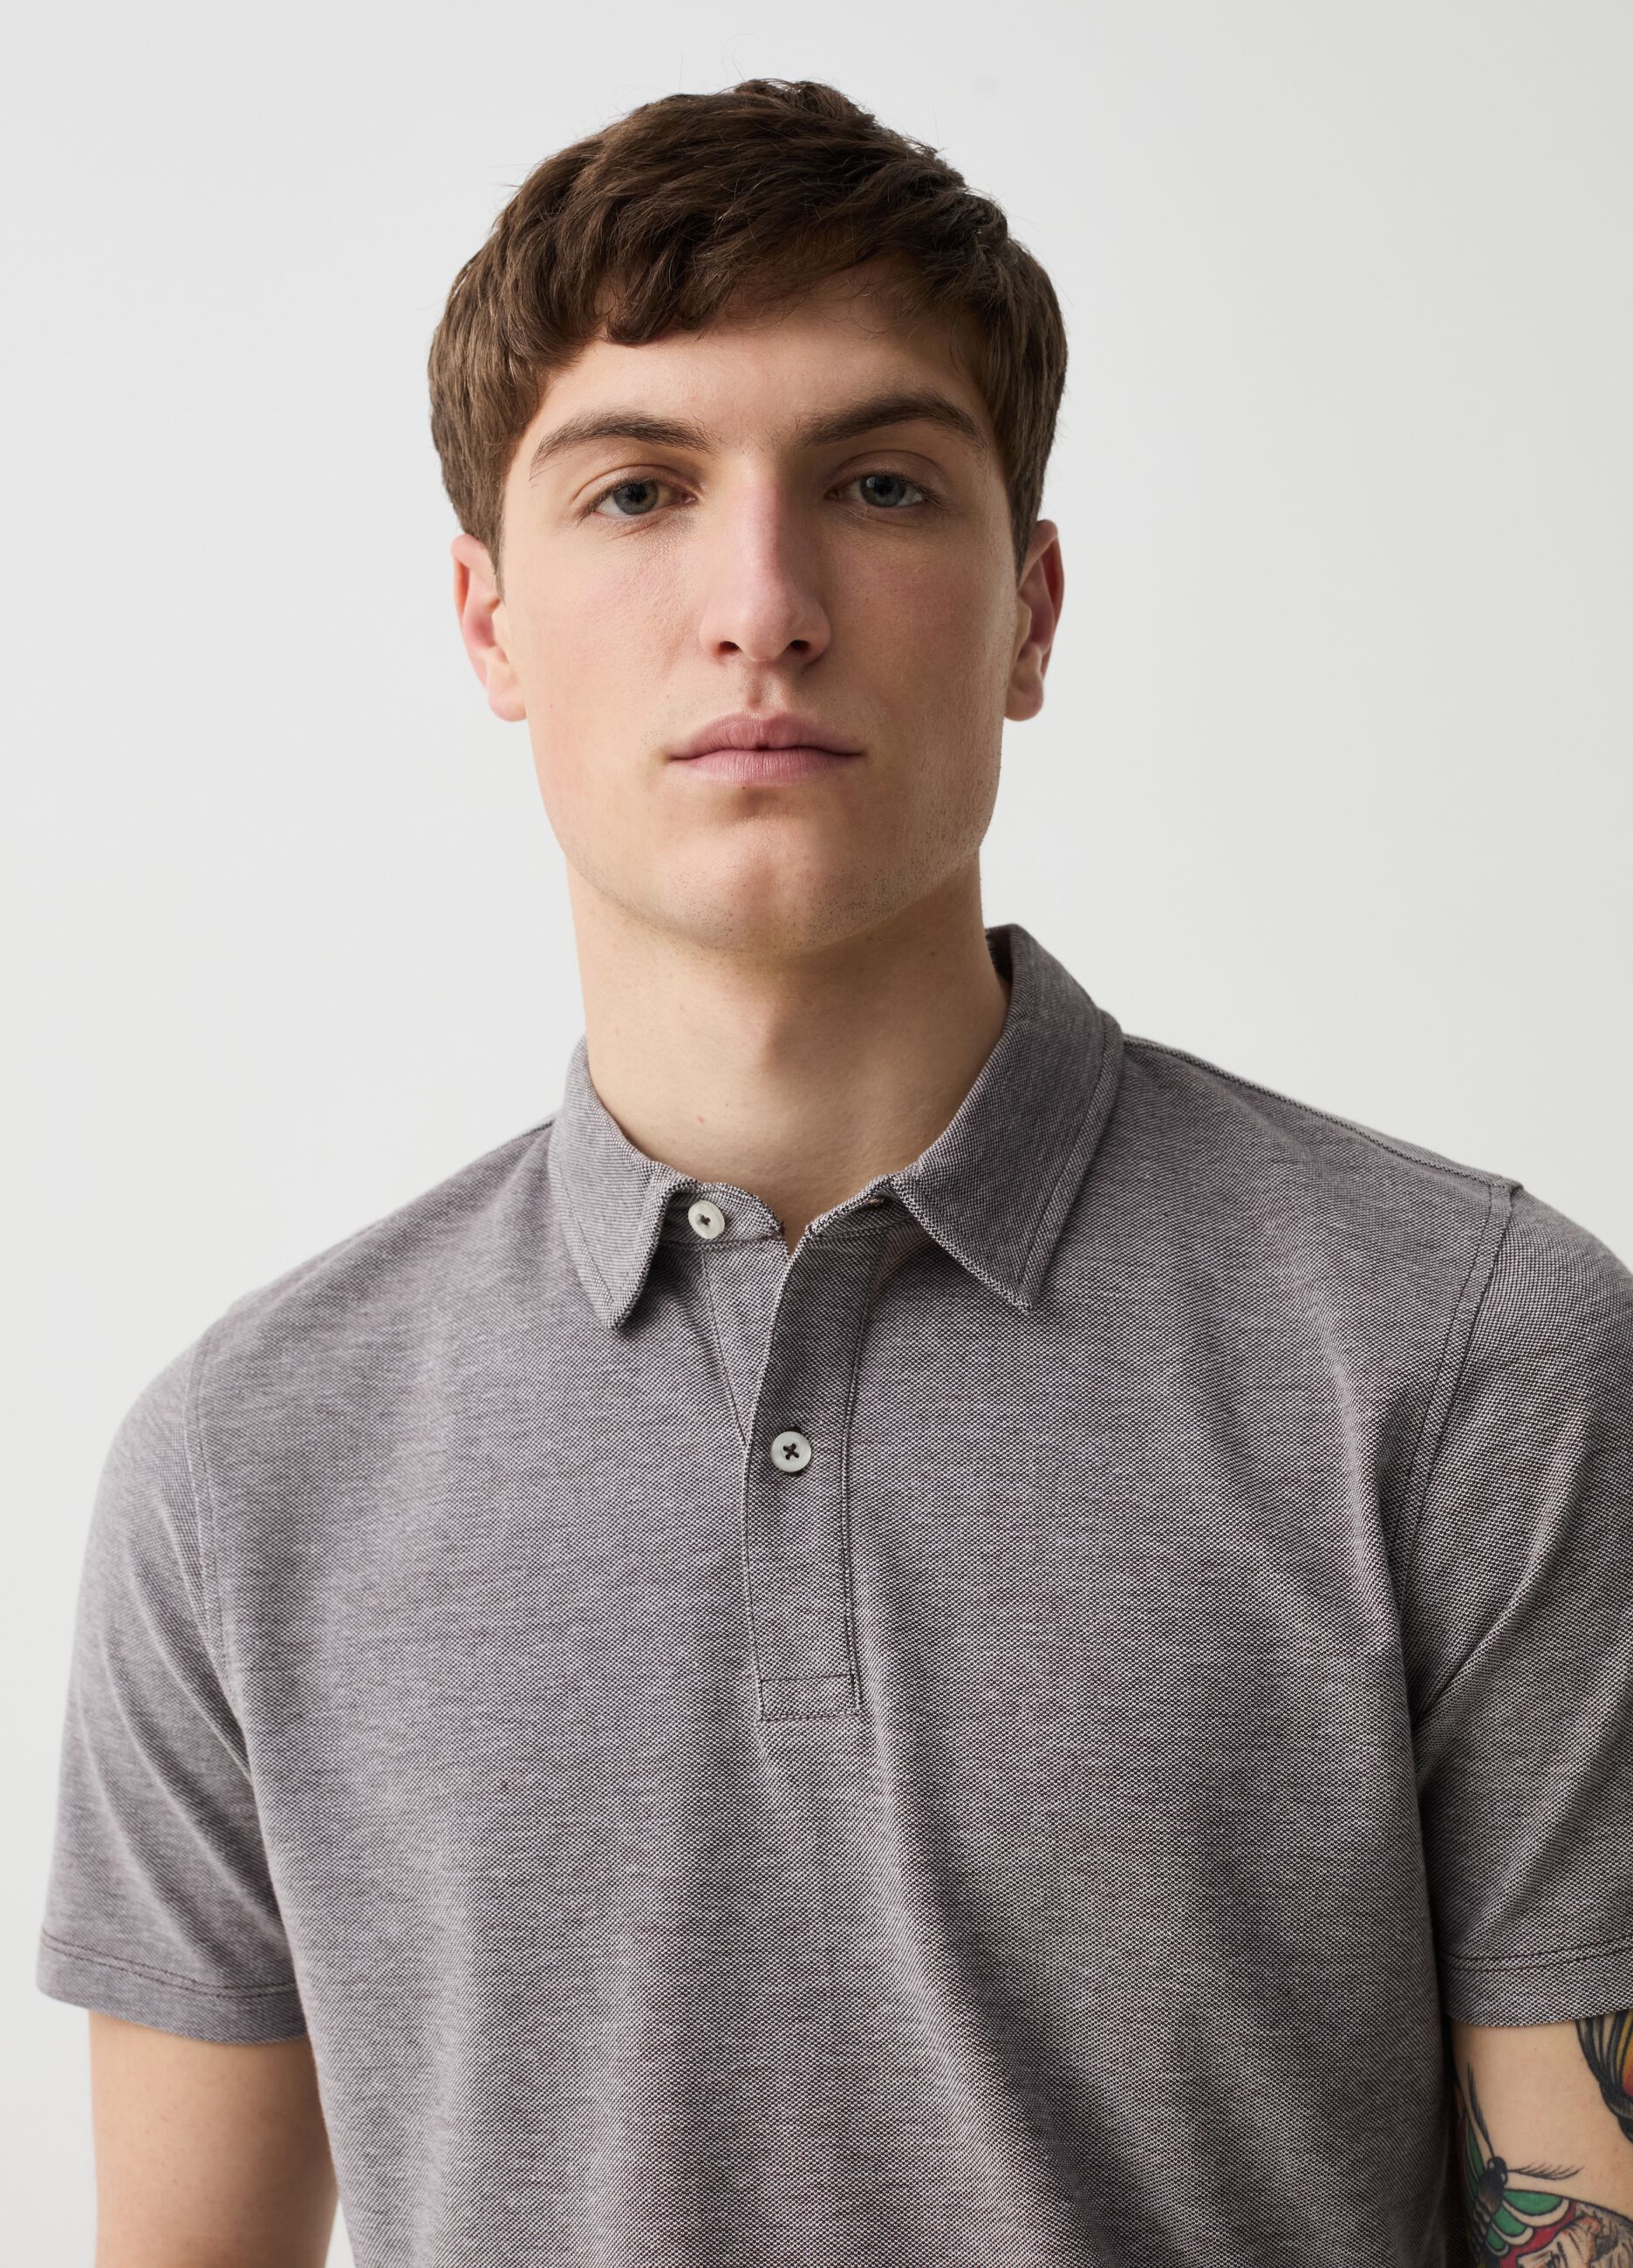 Piquet polo shirt with two-tone jacquard weave